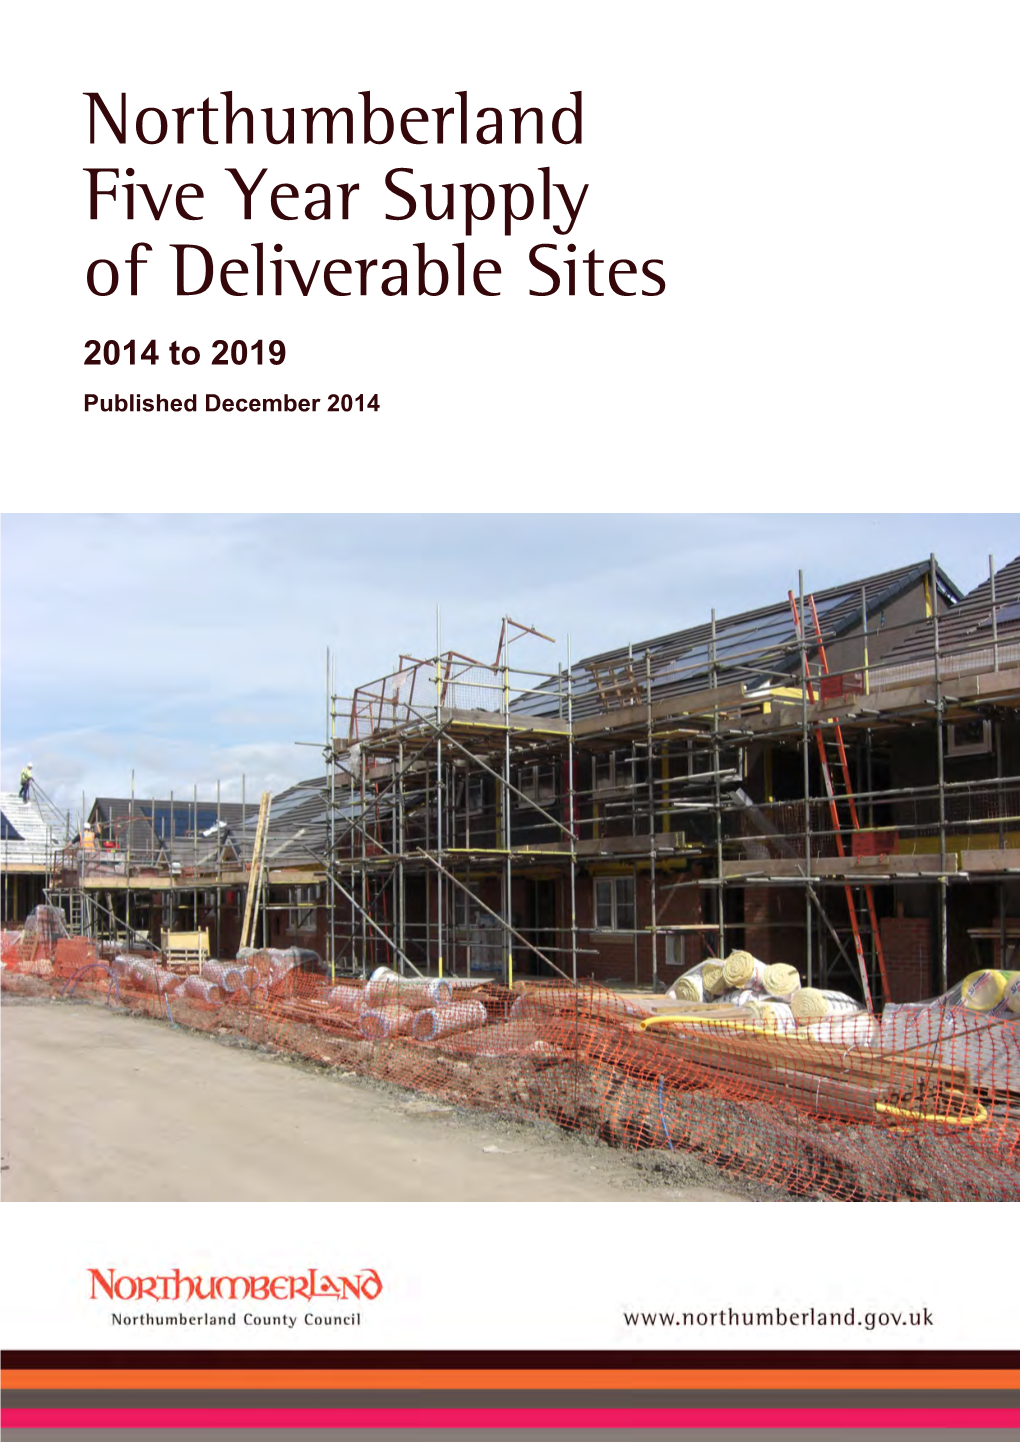 Northumberland Five Year Supply of Deliverable Sites 2014 to 2019 Published December 2014